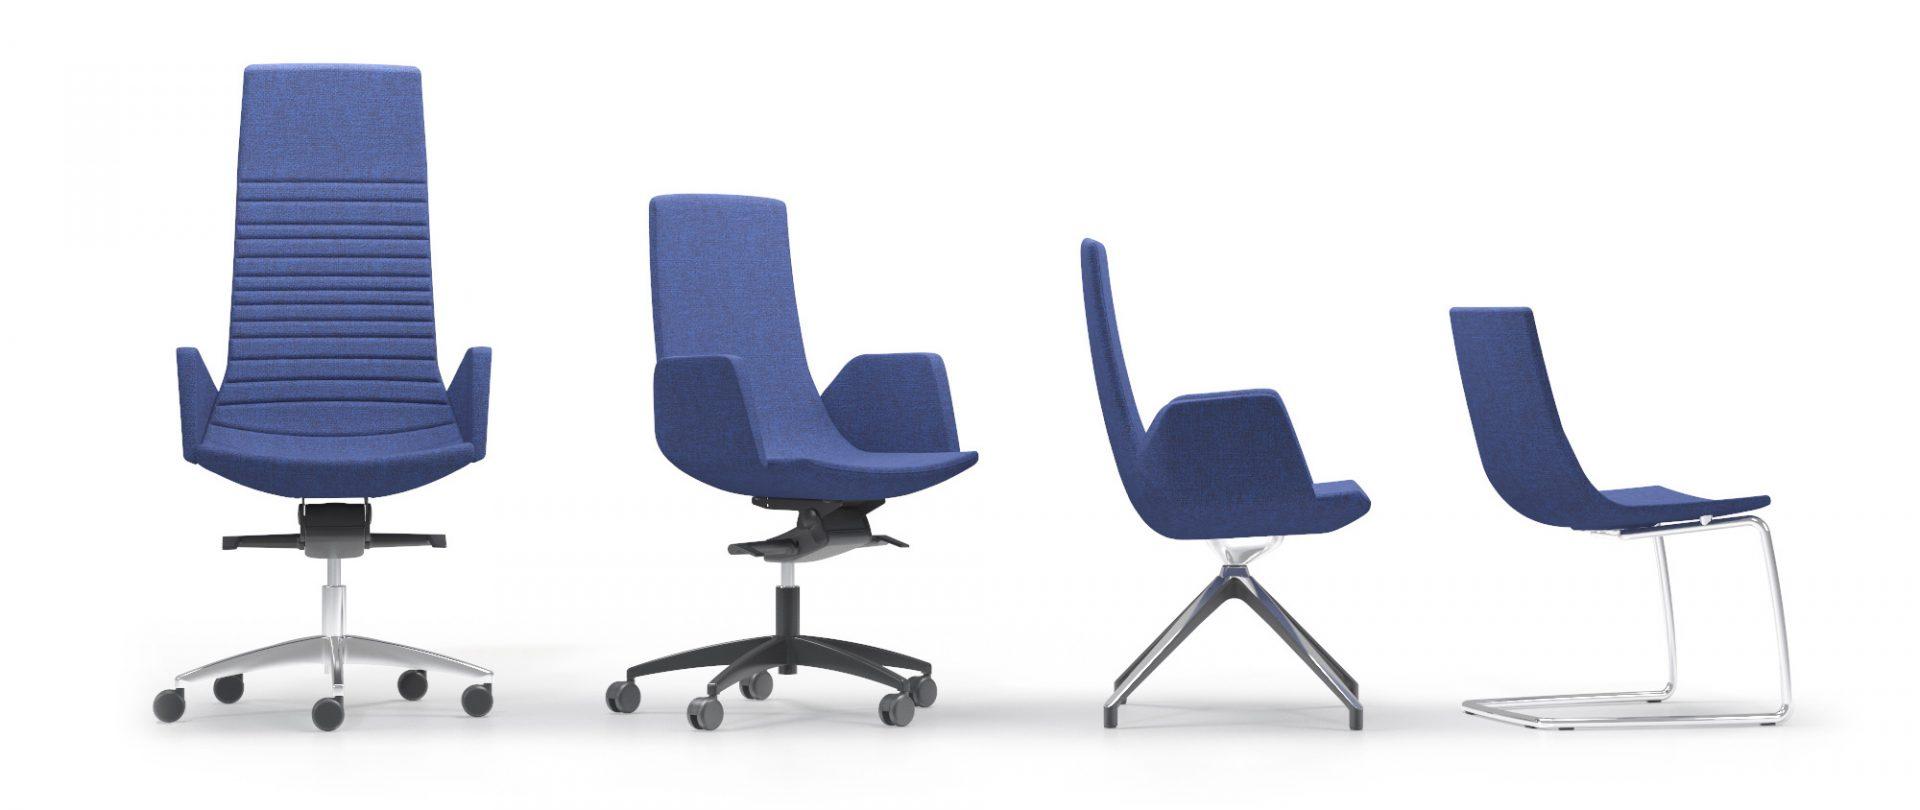 Selection of northcape chairs showing the four different base types